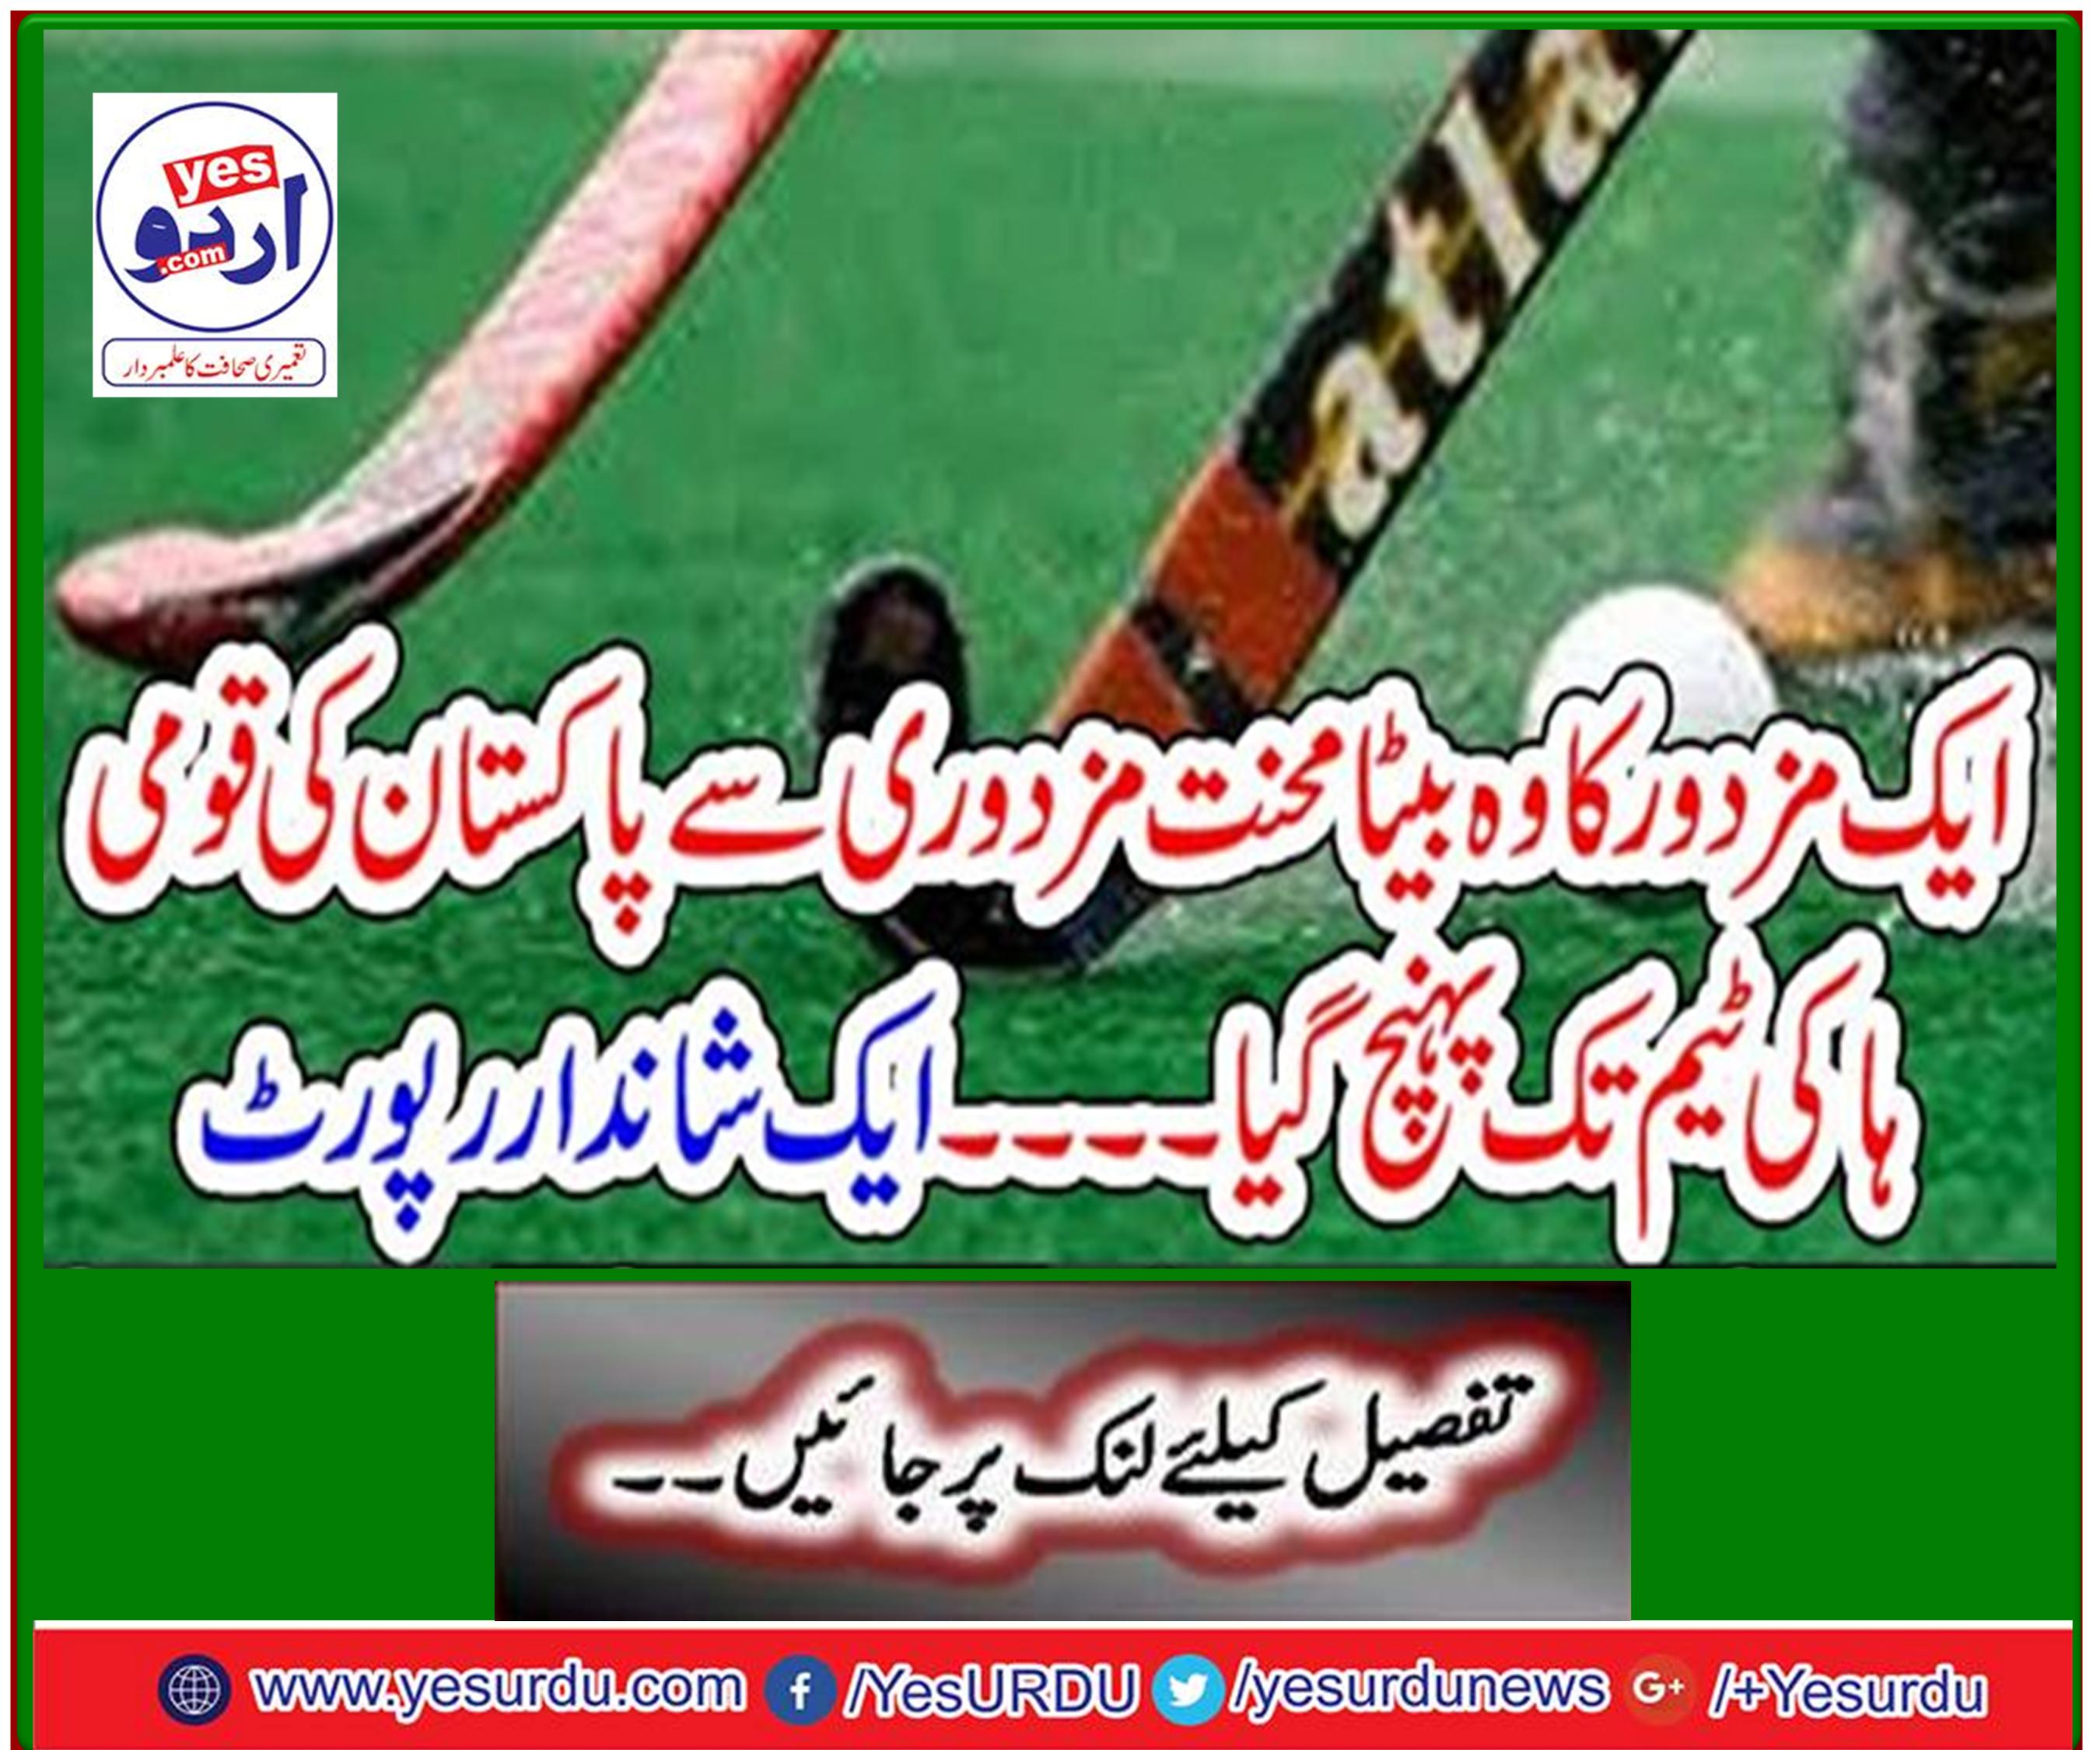 That son of a laborer reached Pakistan's national hockey team with hard work - a fantastic report